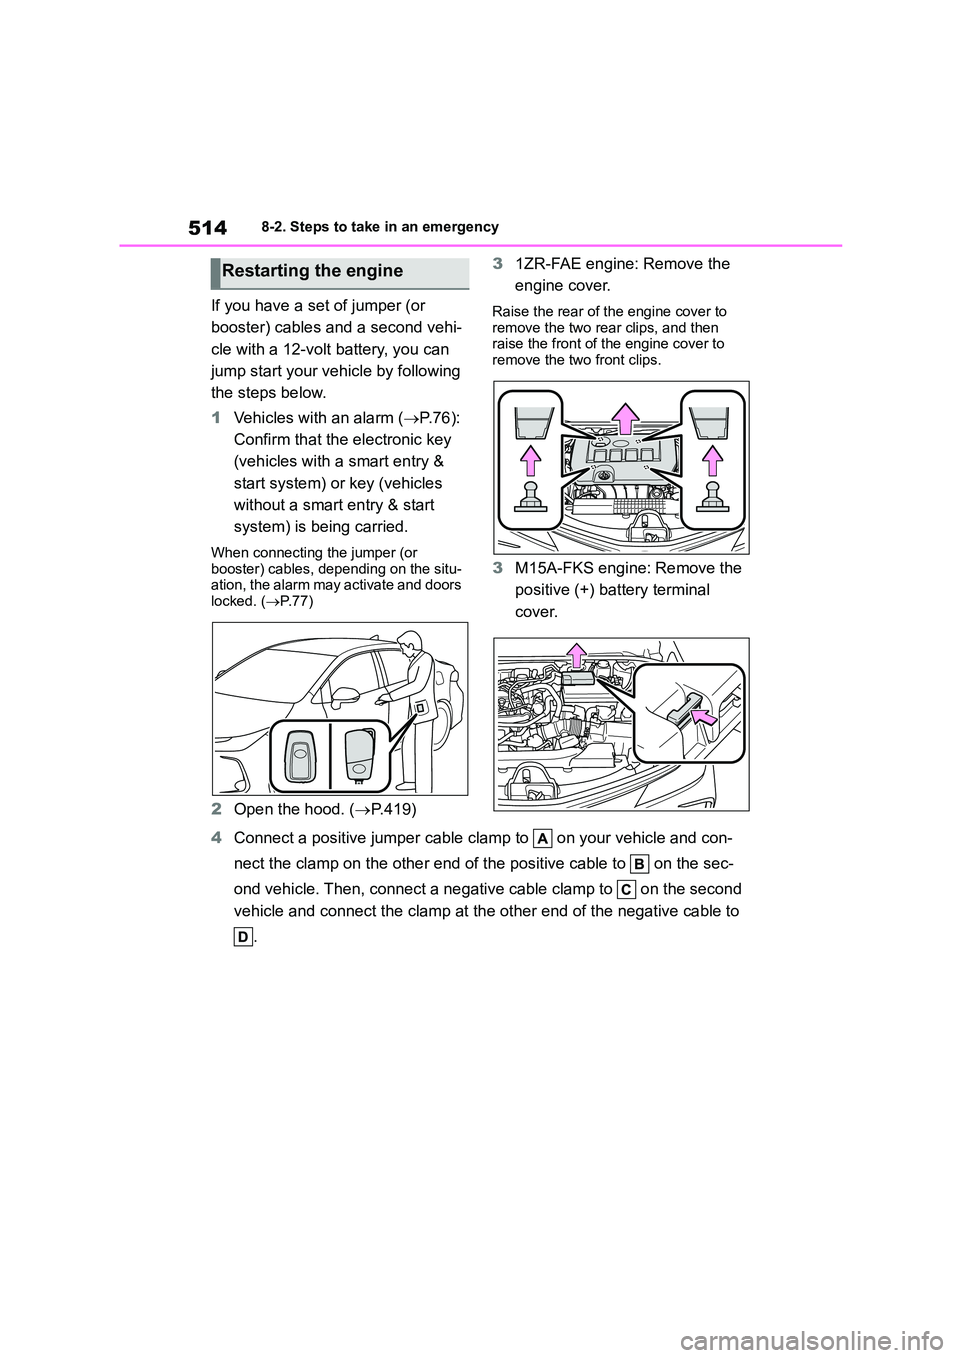 TOYOTA COROLLA 2022  Owners Manual (in English) 5148-2. Steps to take in an emergency
If you have a set of jumper (or  
booster) cables and a second vehi-
cle with a 12-volt battery, you can 
jump start your vehicle by following 
the steps below. 
